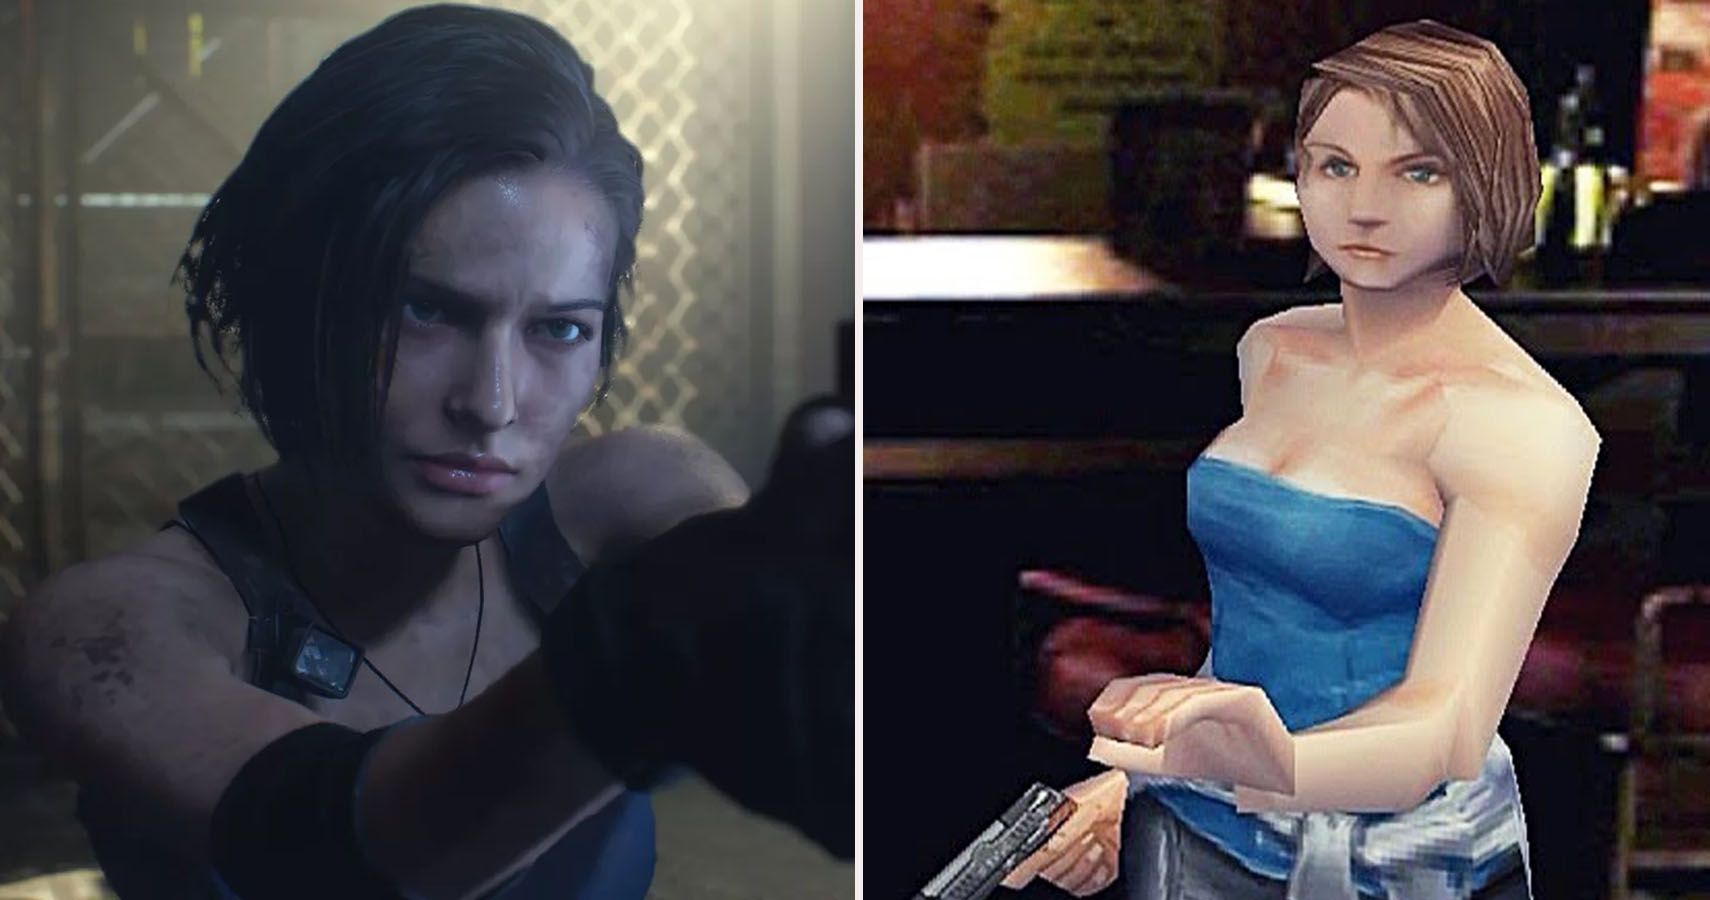 Resident Evil 3: 5 Ways The Remake Is Better (And 5 Ways The Original Is)